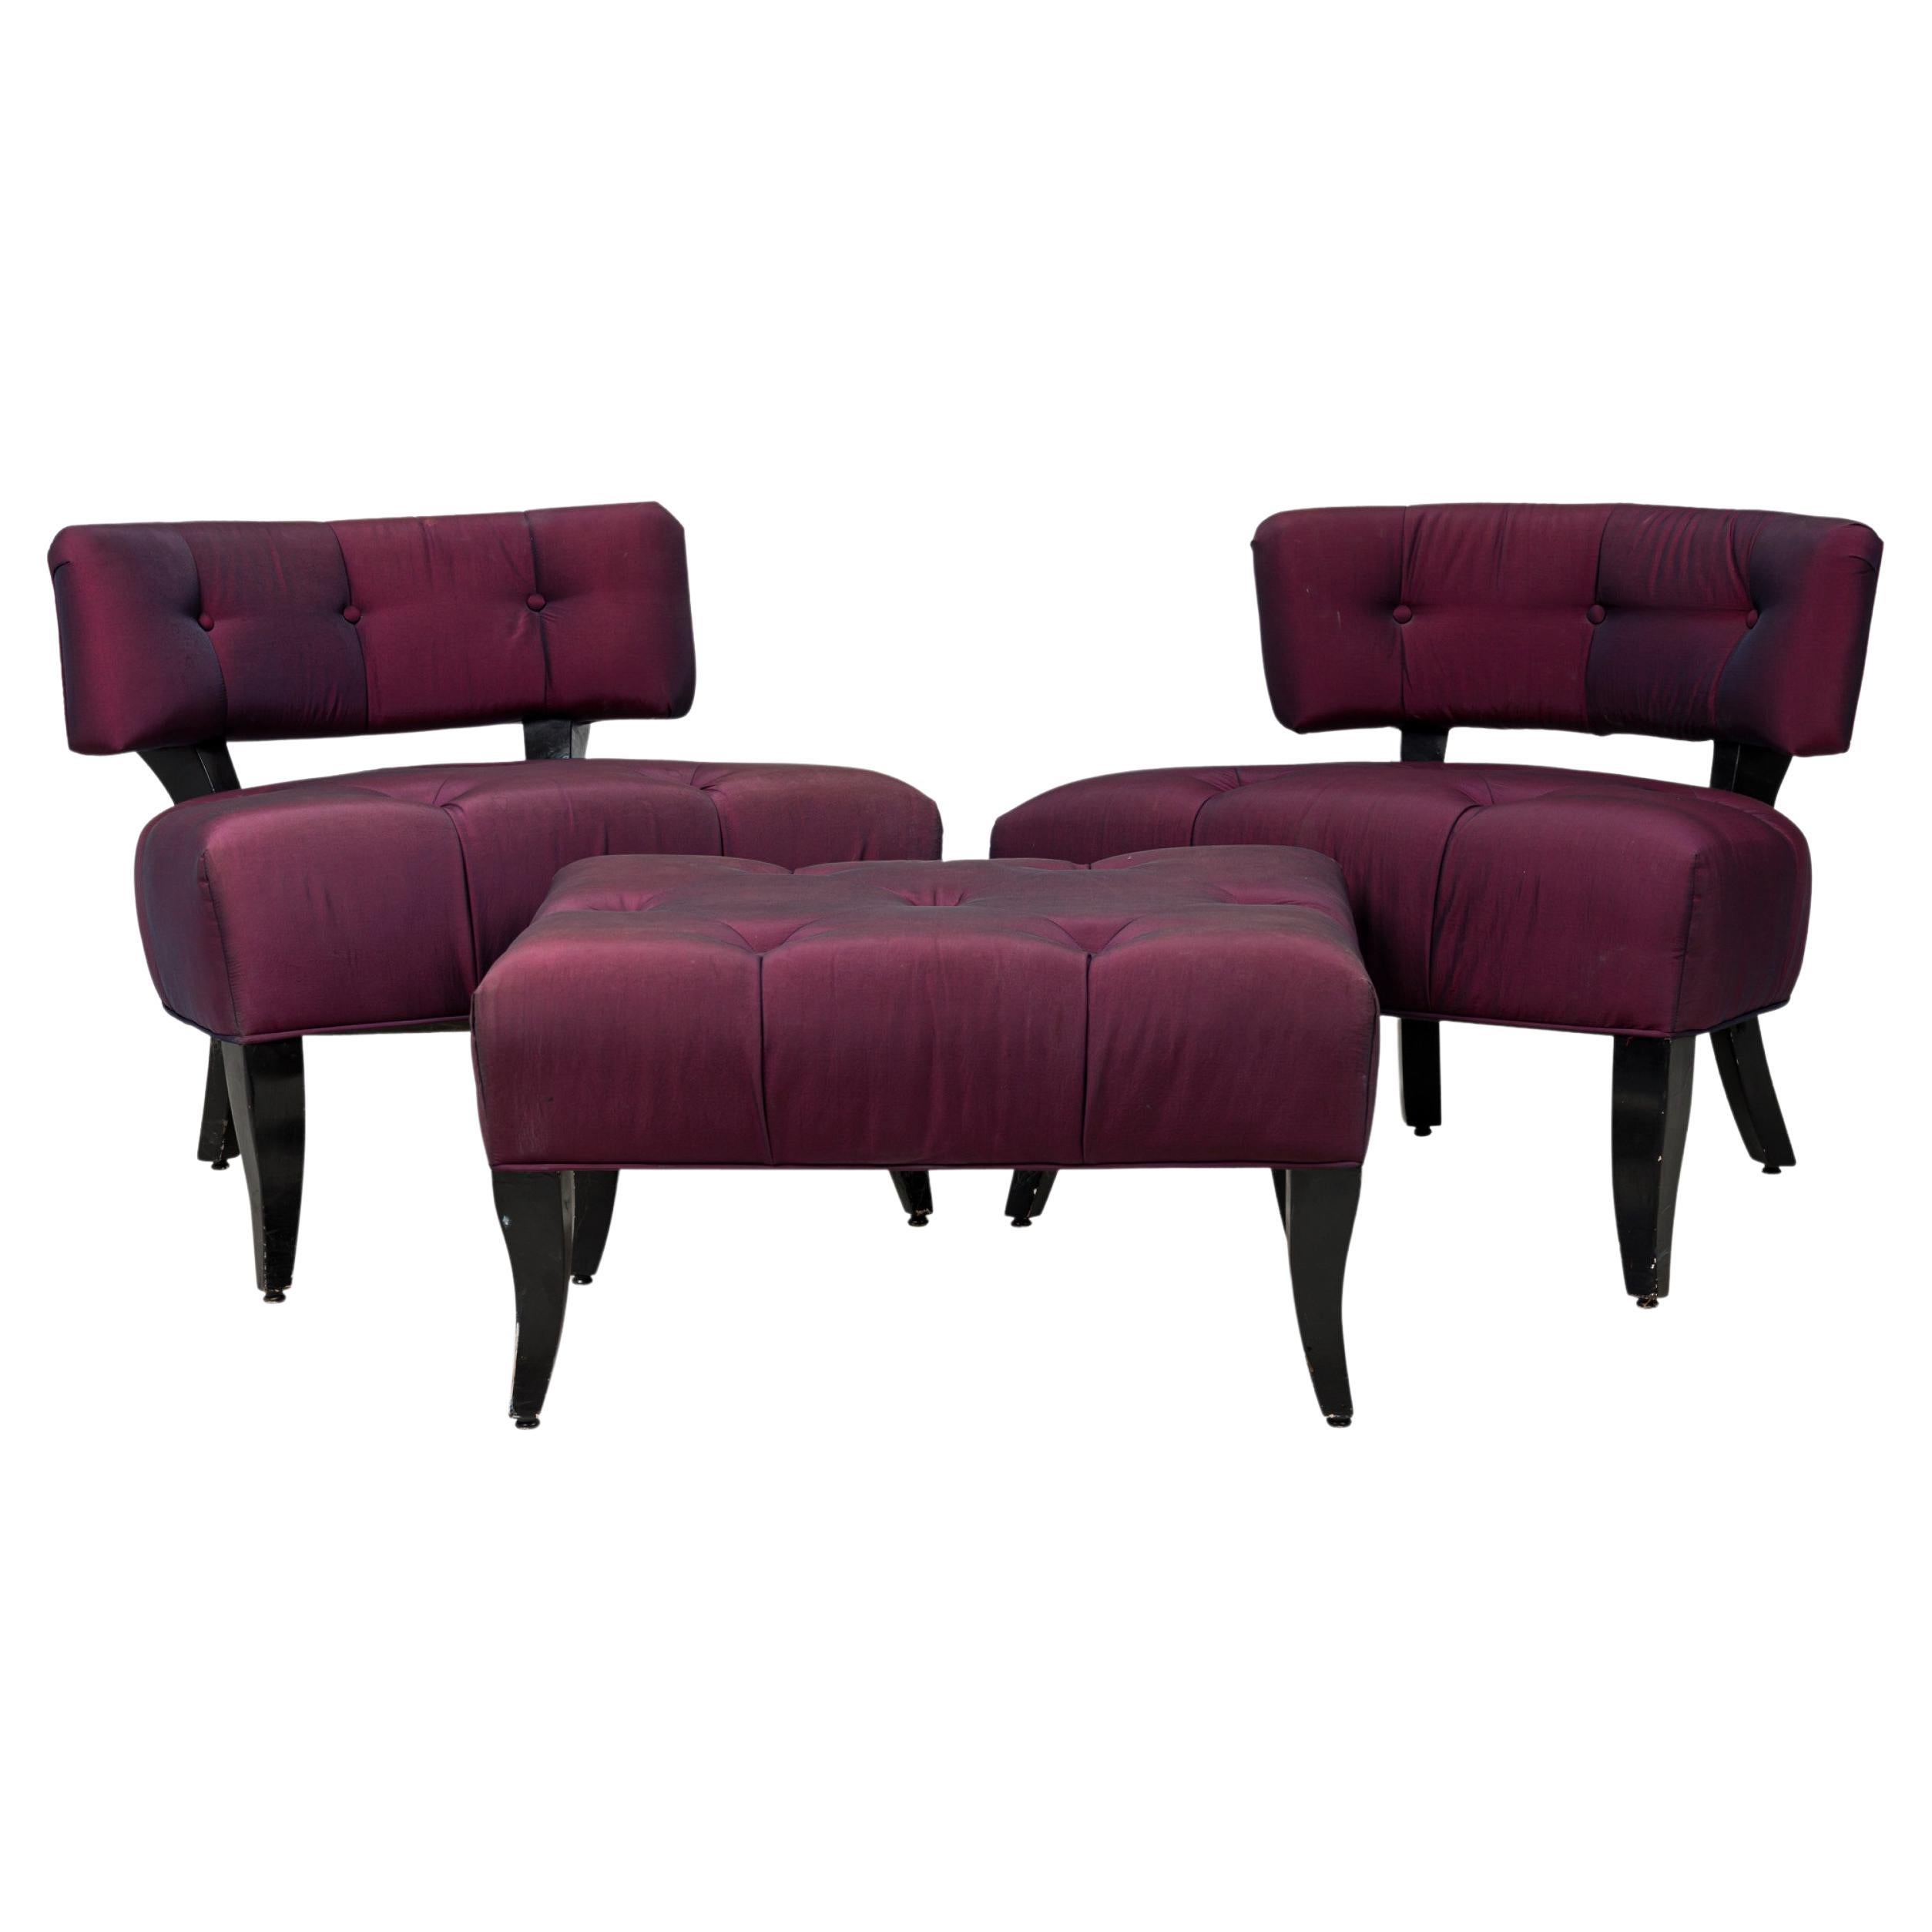 Pair Hollywood Regency Slipper Chairs & Ottoman, attributed to Billy Haines